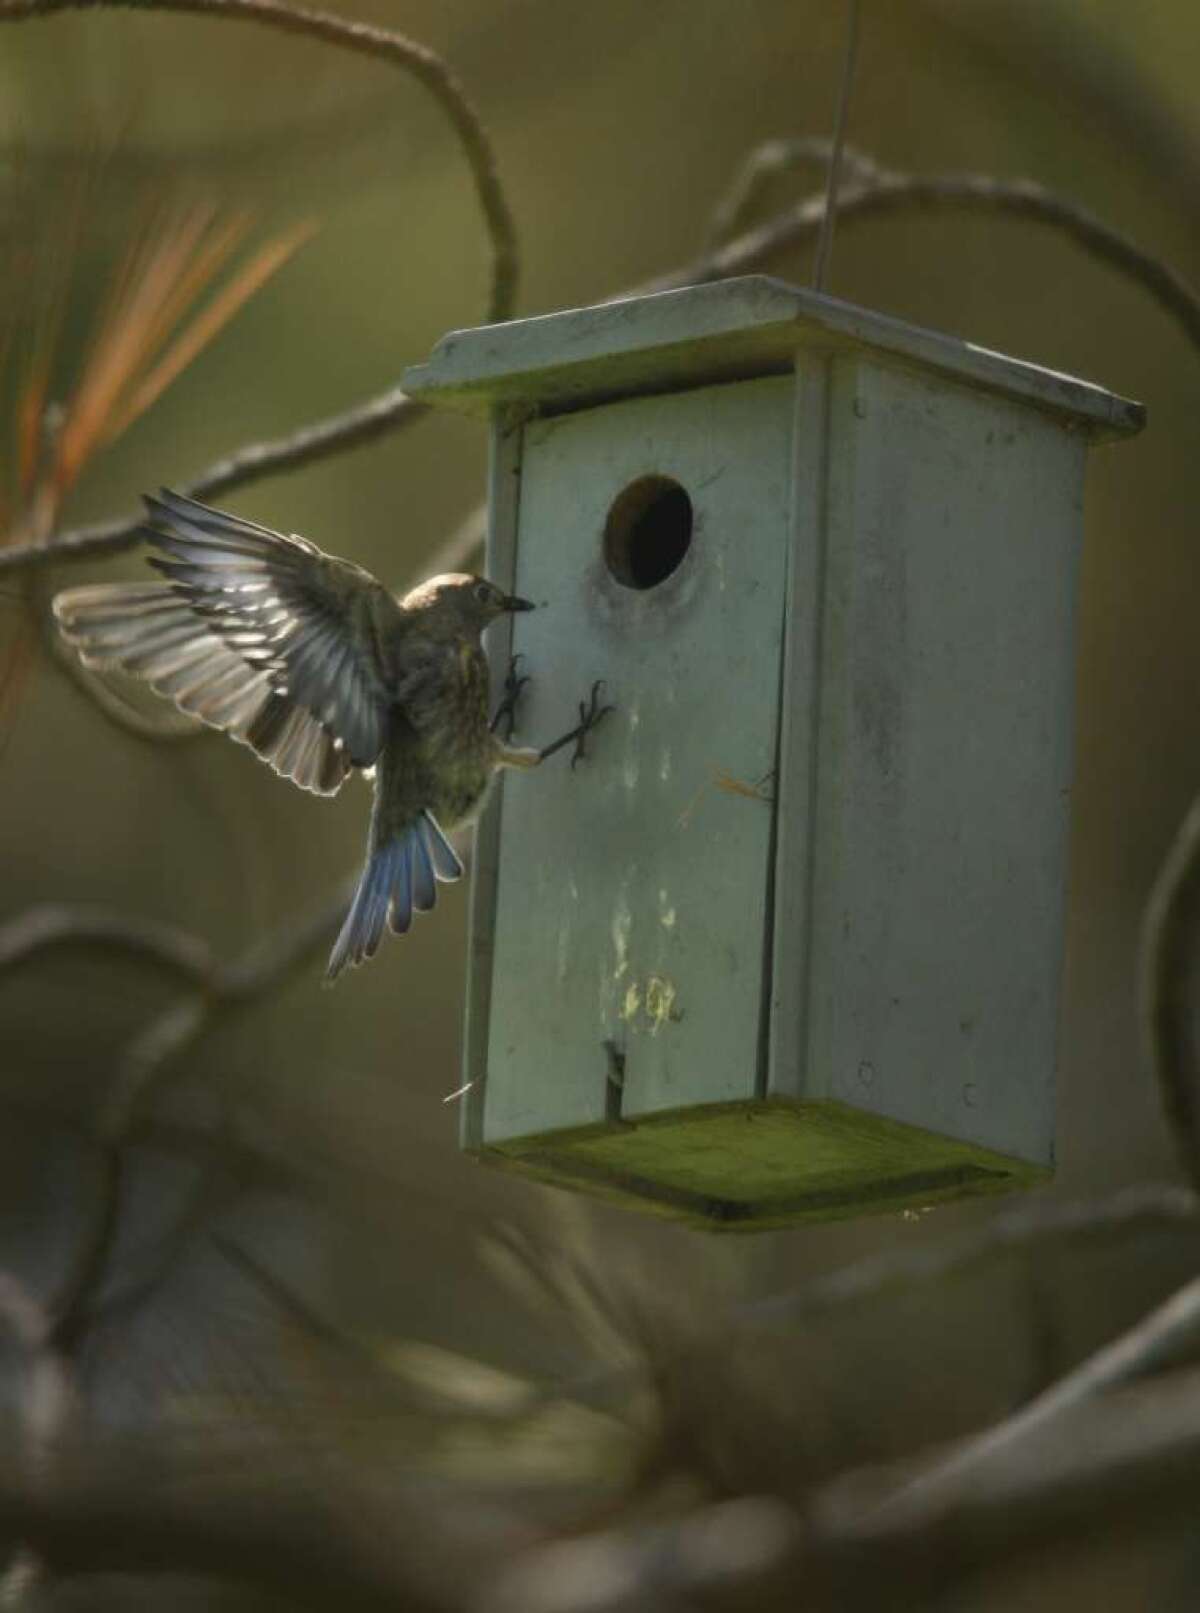 A Western bluebird enters a nesting box installed in Orange County and monitored by members of the Southern California Bluebird Club.